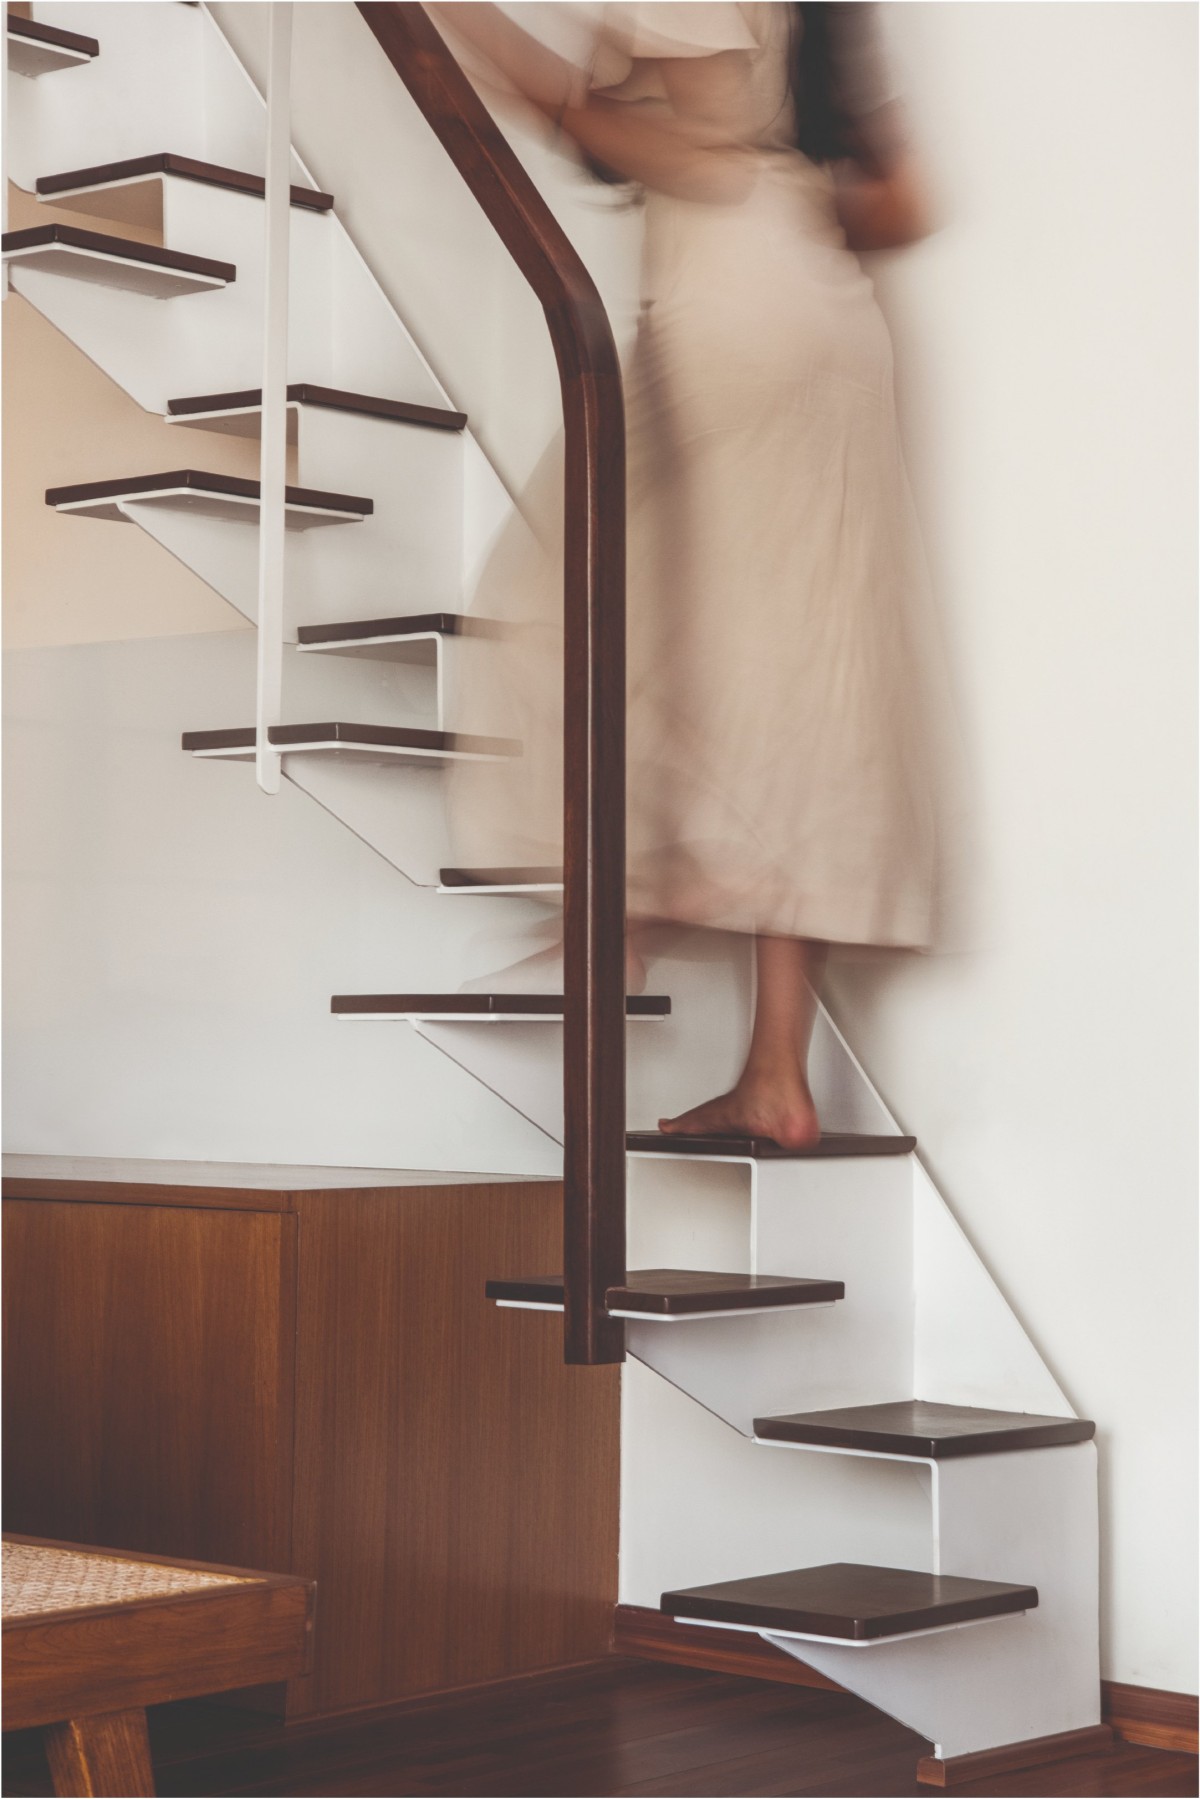 Daughters room mezzanine staircase-Nairy’s residence by Funktion design